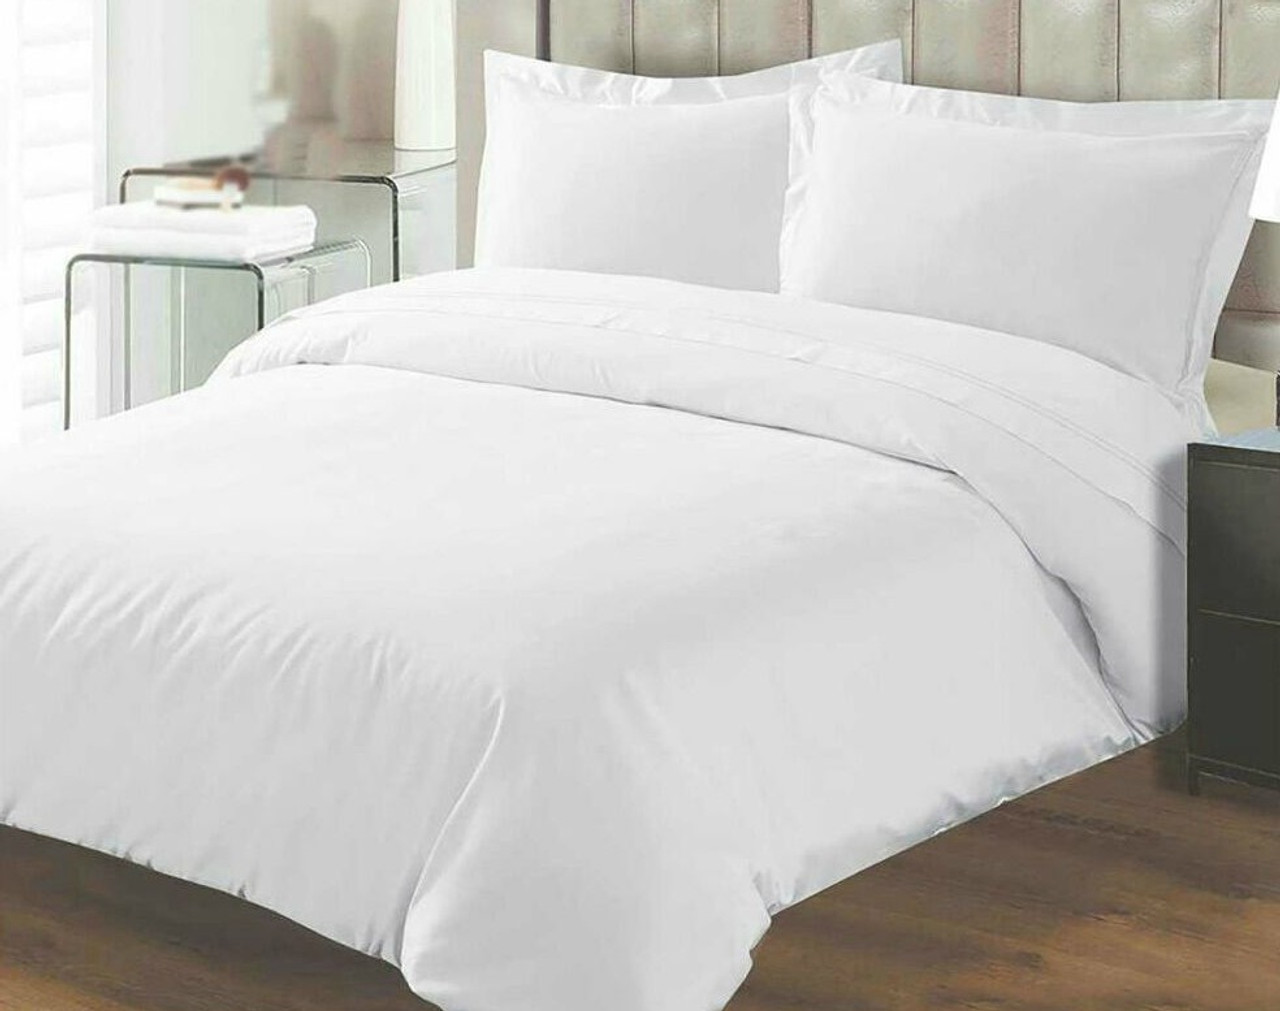 Tc180 Percale Duvet Cover Fitted Sheet Complete Set